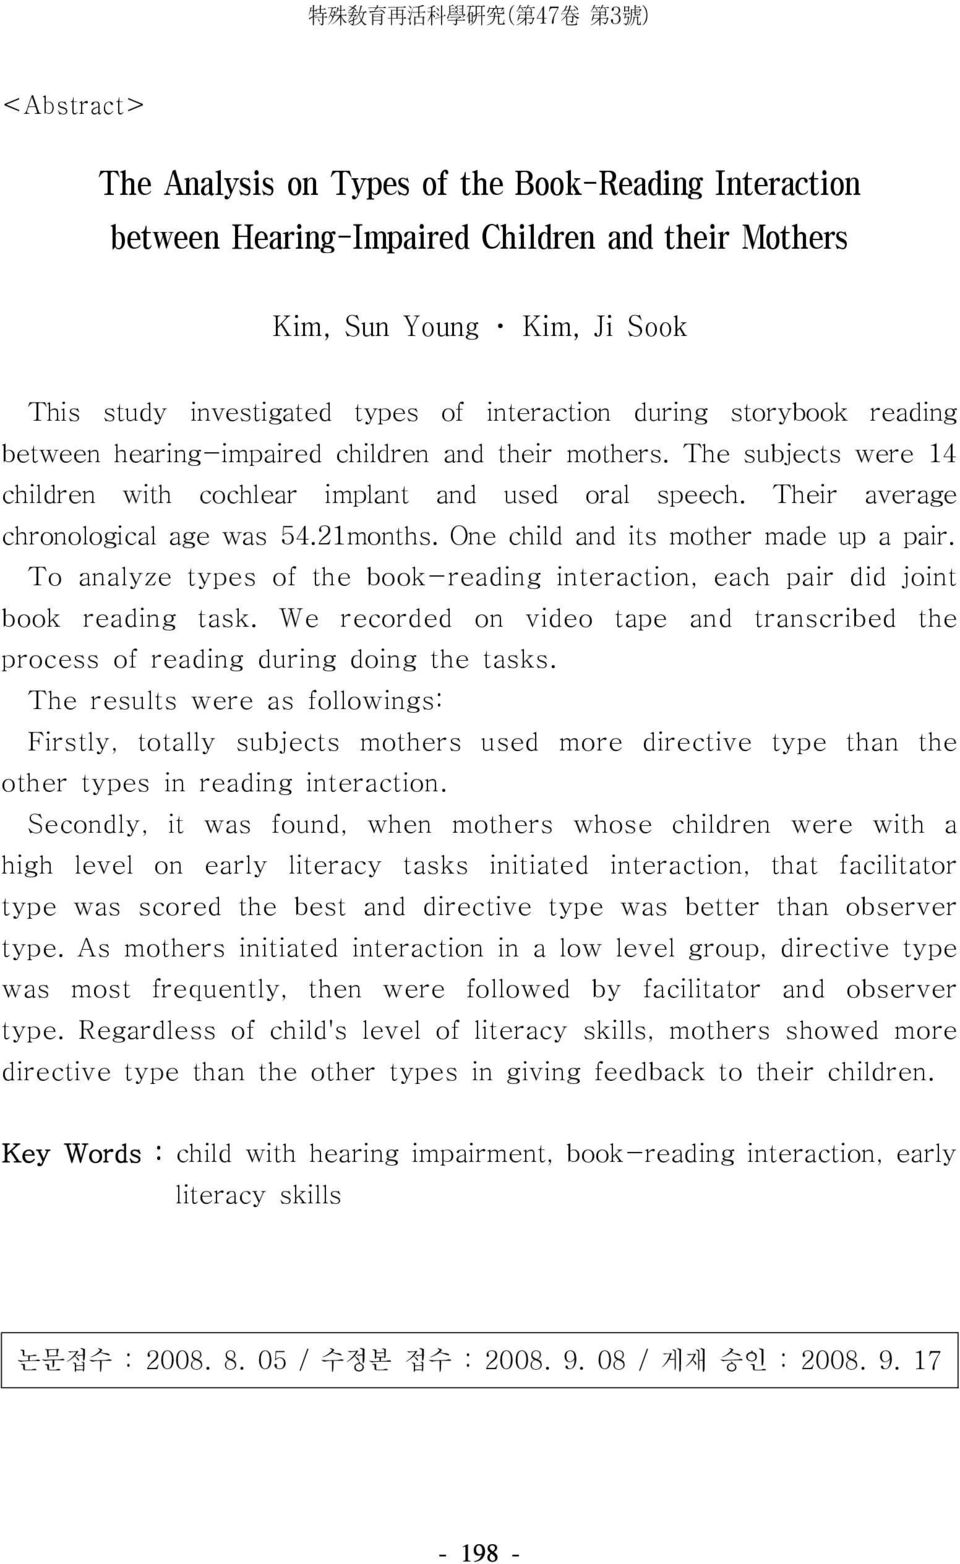 Their average chronological age was 54.21months. One child and its mother made up a pair. To analyze types of the book-reading interaction, each pair did joint book reading task.